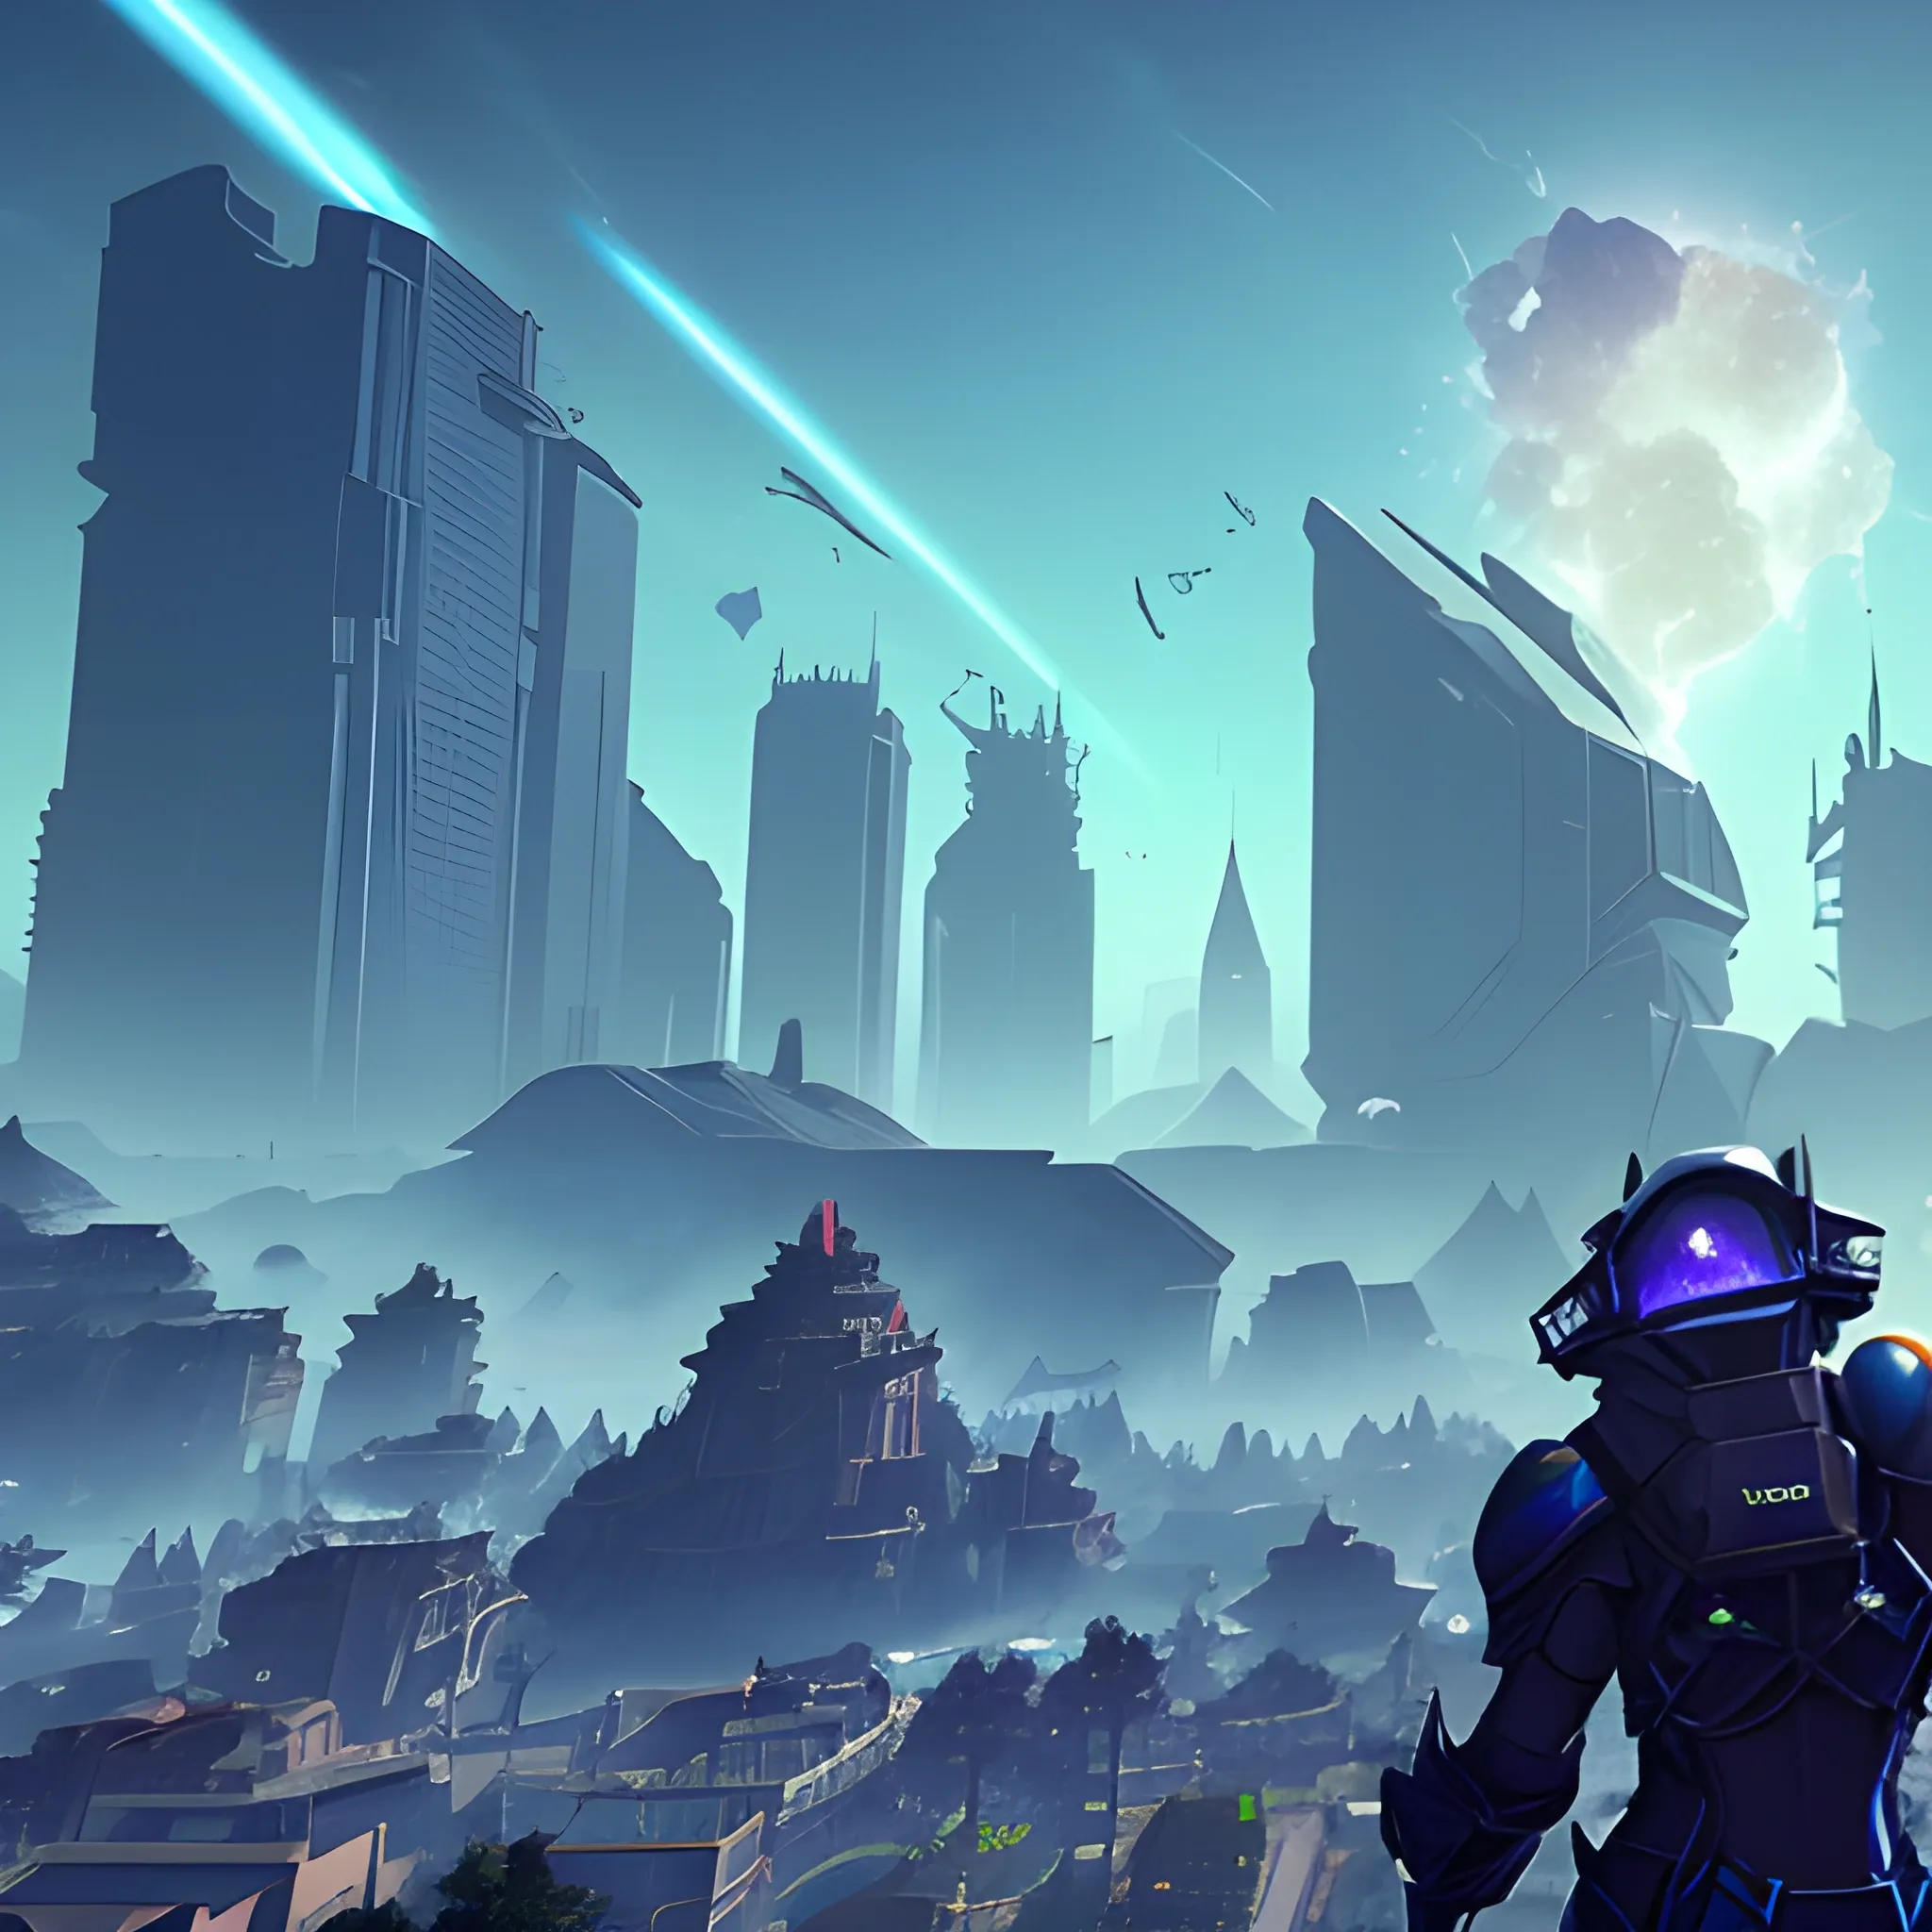 Fate, Blue haze, Black buildings in the distance. open world, reborn, advventure awaits, dope, crashed space ships,

